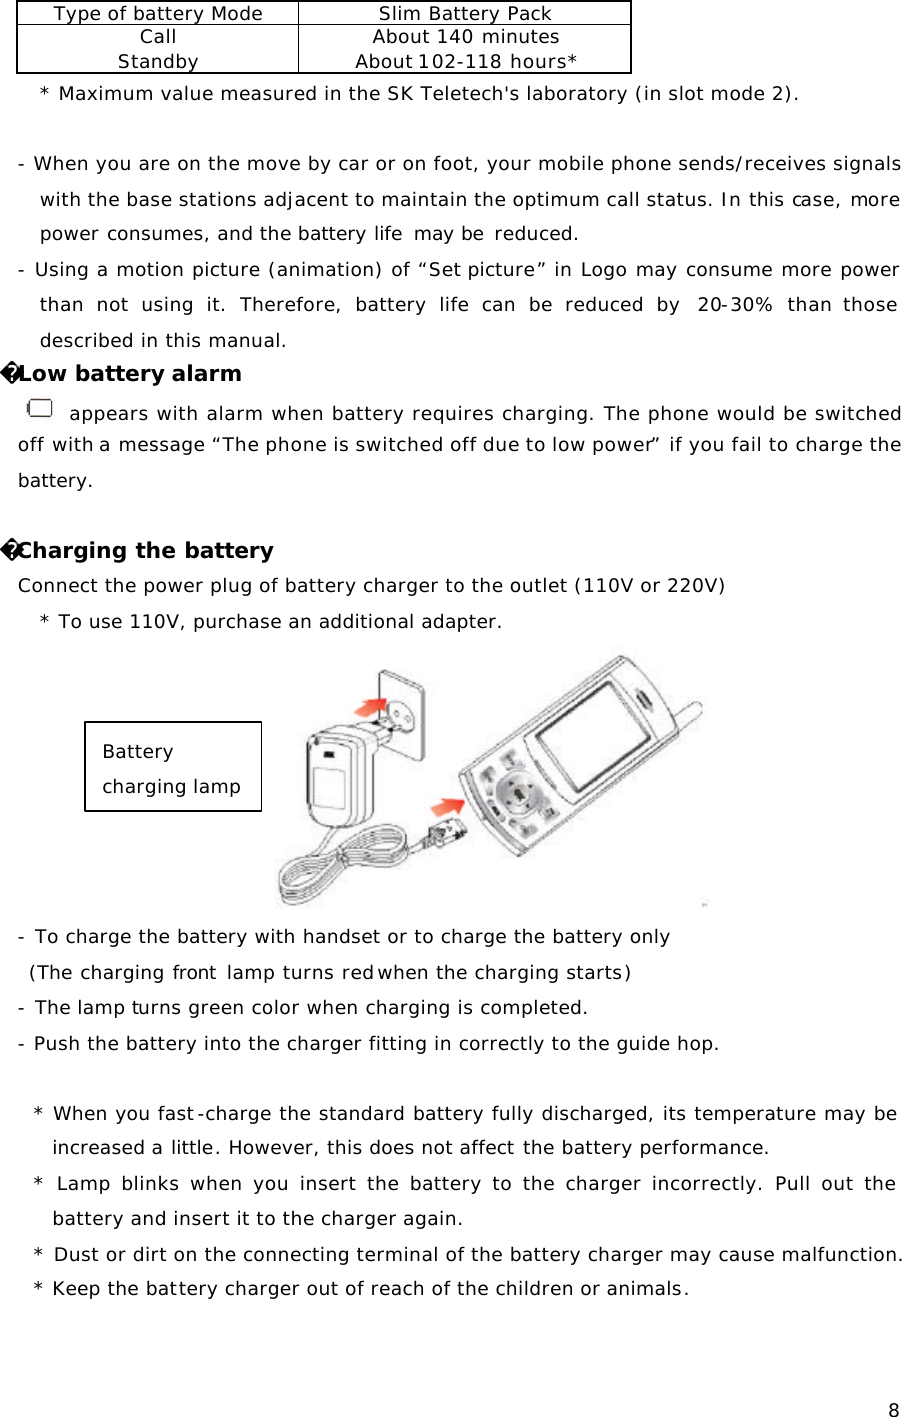  8Type of battery Mode Slim Battery Pack Call About 140 minutes Standby About 102-118 hours* * Maximum value measured in the SK Teletech&apos;s laboratory (in slot mode 2).  - When you are on the move by car or on foot, your mobile phone sends/receives signals with the base stations adjacent to maintain the optimum call status. In this case, more power consumes, and the battery life  may be reduced. - Using a motion picture (animation) of “Set picture” in Logo may consume more power than not using it. Therefore, battery life can be reduced by  20-30% than those described in this manual. Low battery alarm  appears with alarm when battery requires charging. The phone would be switched off with a message “The phone is switched off due to low power” if you fail to charge the battery.  Charging the battery Connect the power plug of battery charger to the outlet (110V or 220V) * To use 110V, purchase an additional adapter.   - To charge the battery with handset or to charge the battery only    (The charging front lamp turns red when the charging starts) - The lamp turns green color when charging is completed. - Push the battery into the charger fitting in correctly to the guide hop.   * When you fast-charge the standard battery fully discharged, its temperature may be increased a little. However, this does not affect the battery performance. * Lamp blinks when you insert the battery to the charger incorrectly. Pull out the battery and insert it to the charger again.  * Dust or dirt on the connecting terminal of the battery charger may cause malfunction. * Keep the battery charger out of reach of the children or animals.    Battery charging lamp 